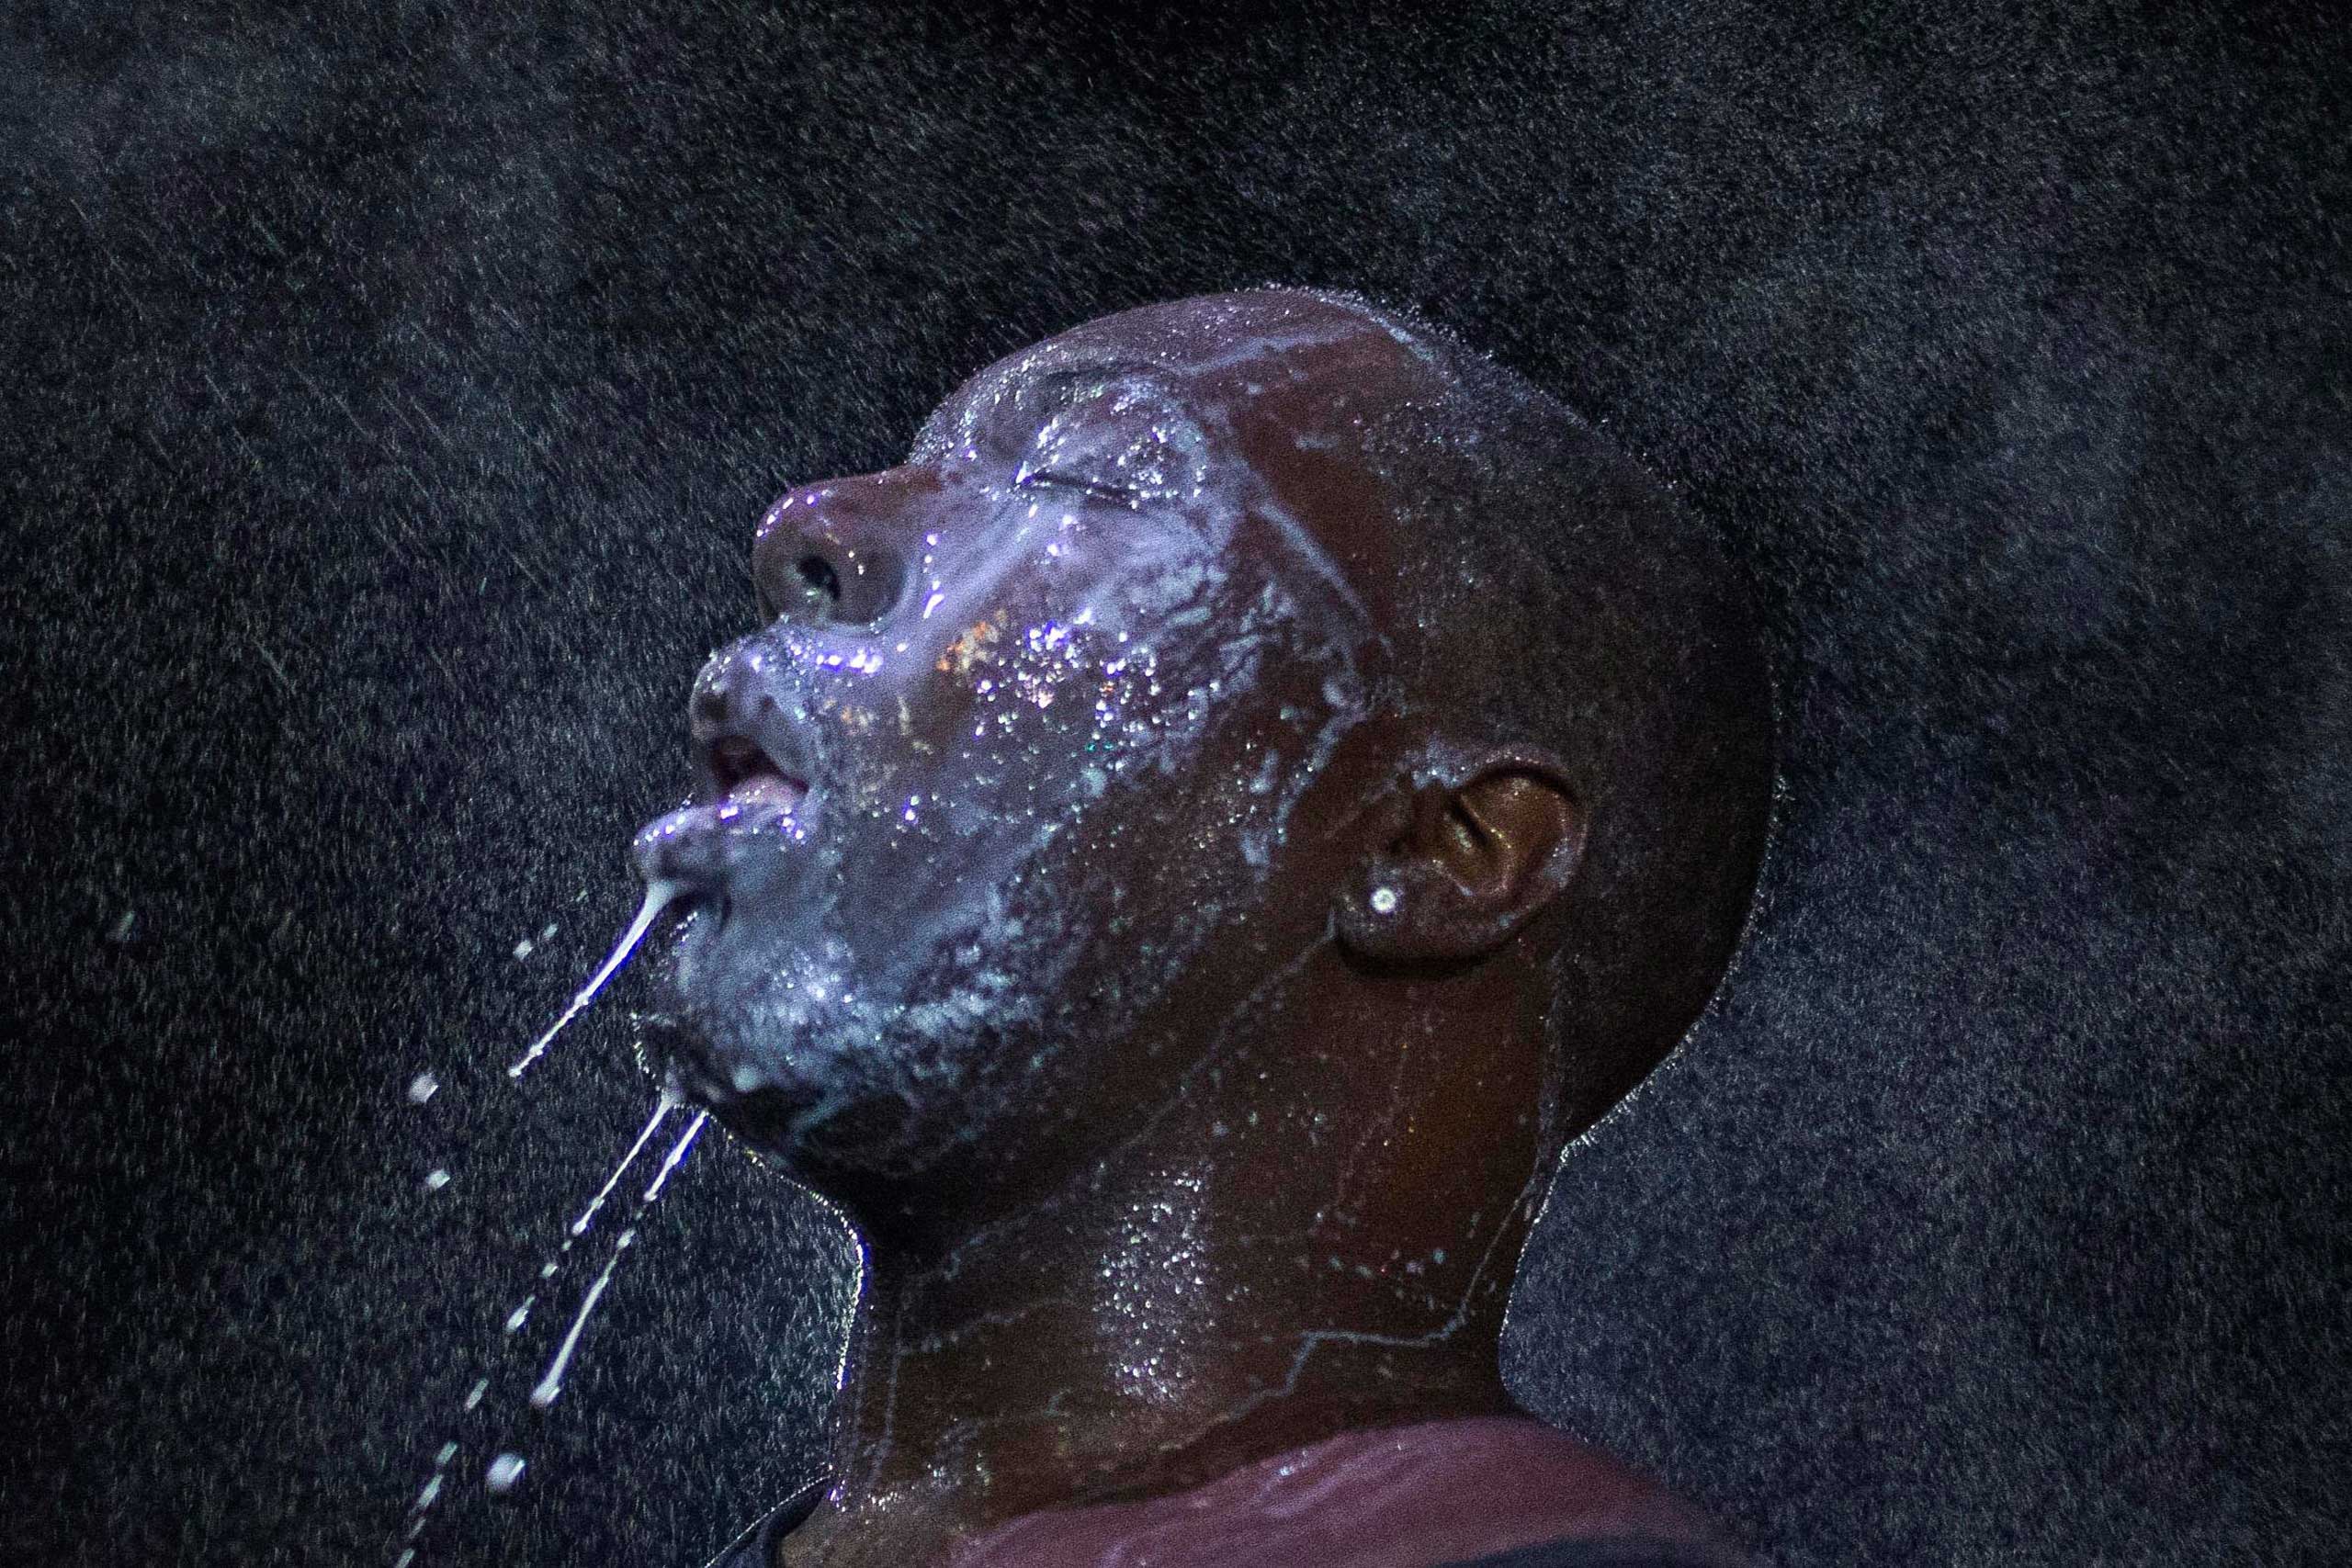 A man is doused with milk and sprayed with mist after being hit by an eye irritant from security forces trying to disperse demonstrators protesting against the shooting of unarmed black teen Michael Brown in Ferguson, Mo., Aug. 20, 2014.